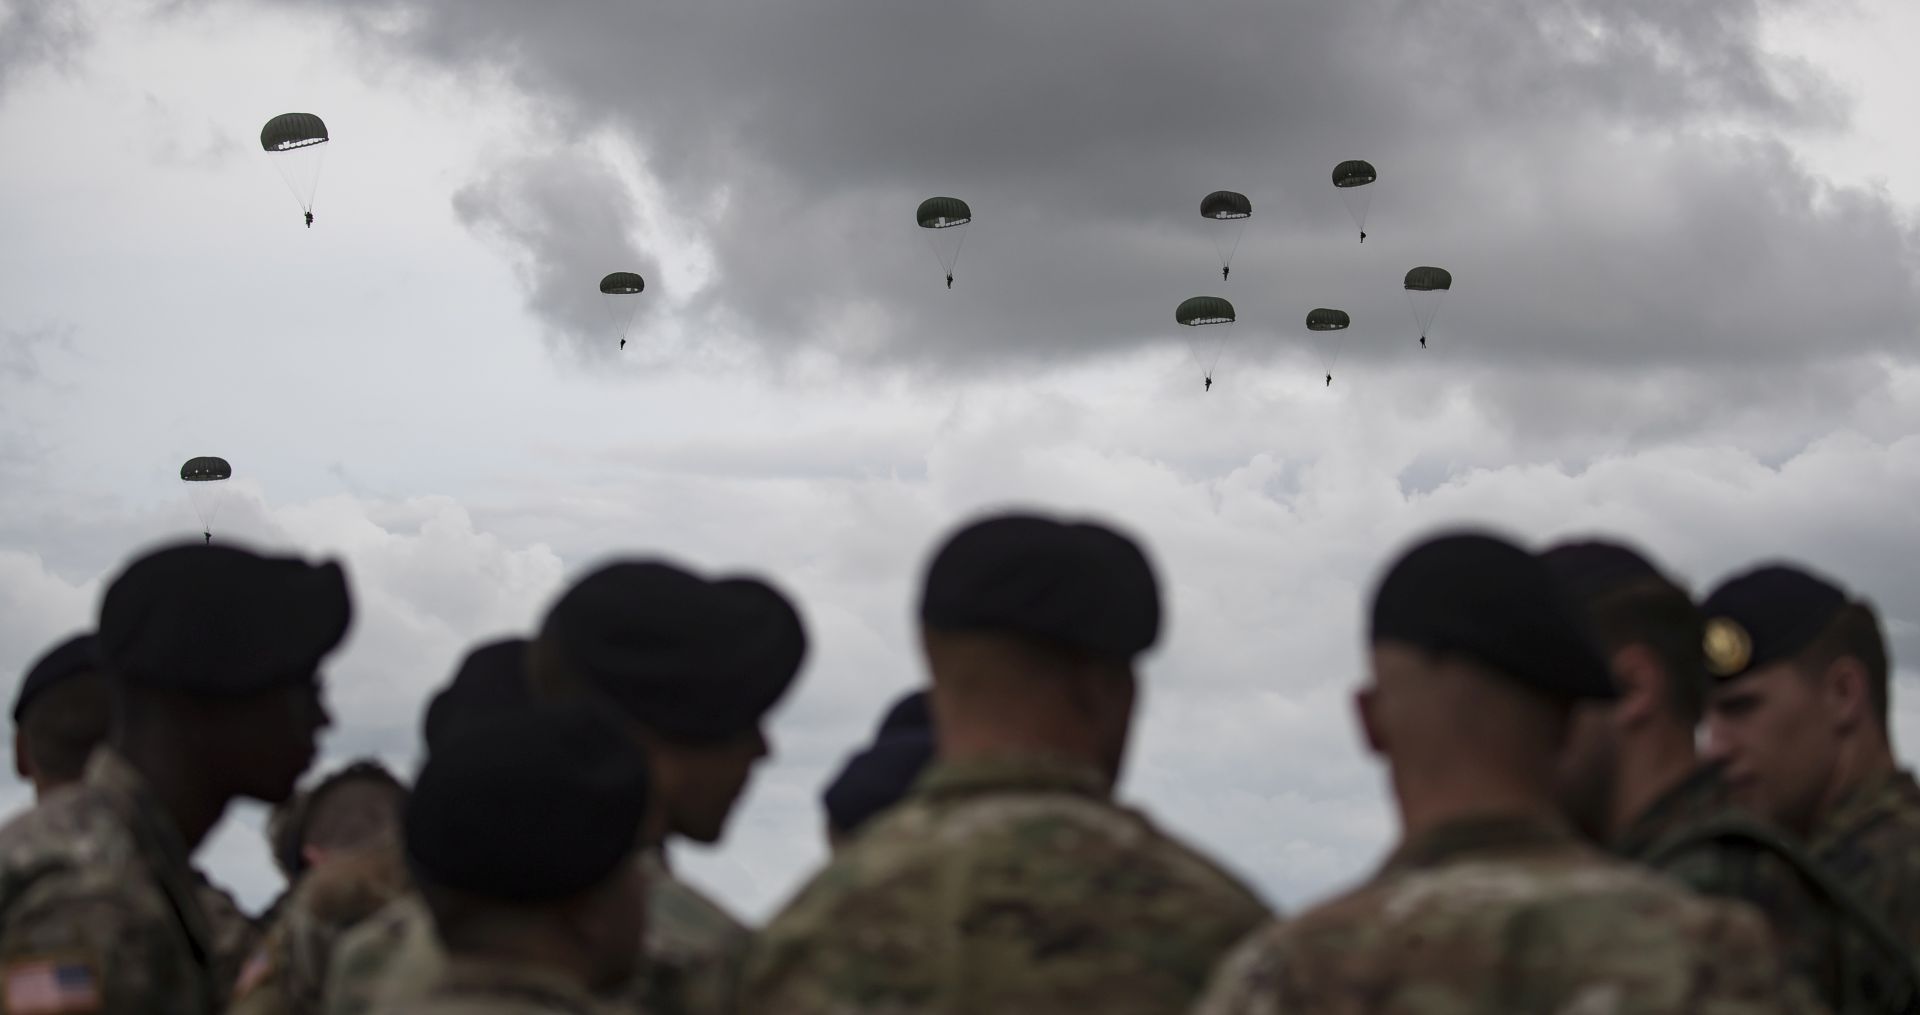 epa07627006 US Airborne soldiers look on as C-47 Dakota airplanes drop parachutists in WW2 attire near the Normandy coast ahead of the 75th D-Day anniversary, in Carentan,  France, 05 June 2019. World leaders are to attend memorial events in Normandy, France on 06 June 2019 to mark the 75th anniversary of the D-Day landings, which marked the beginning of the end of World War II in Europe.  EPA/IAN LANGSDON